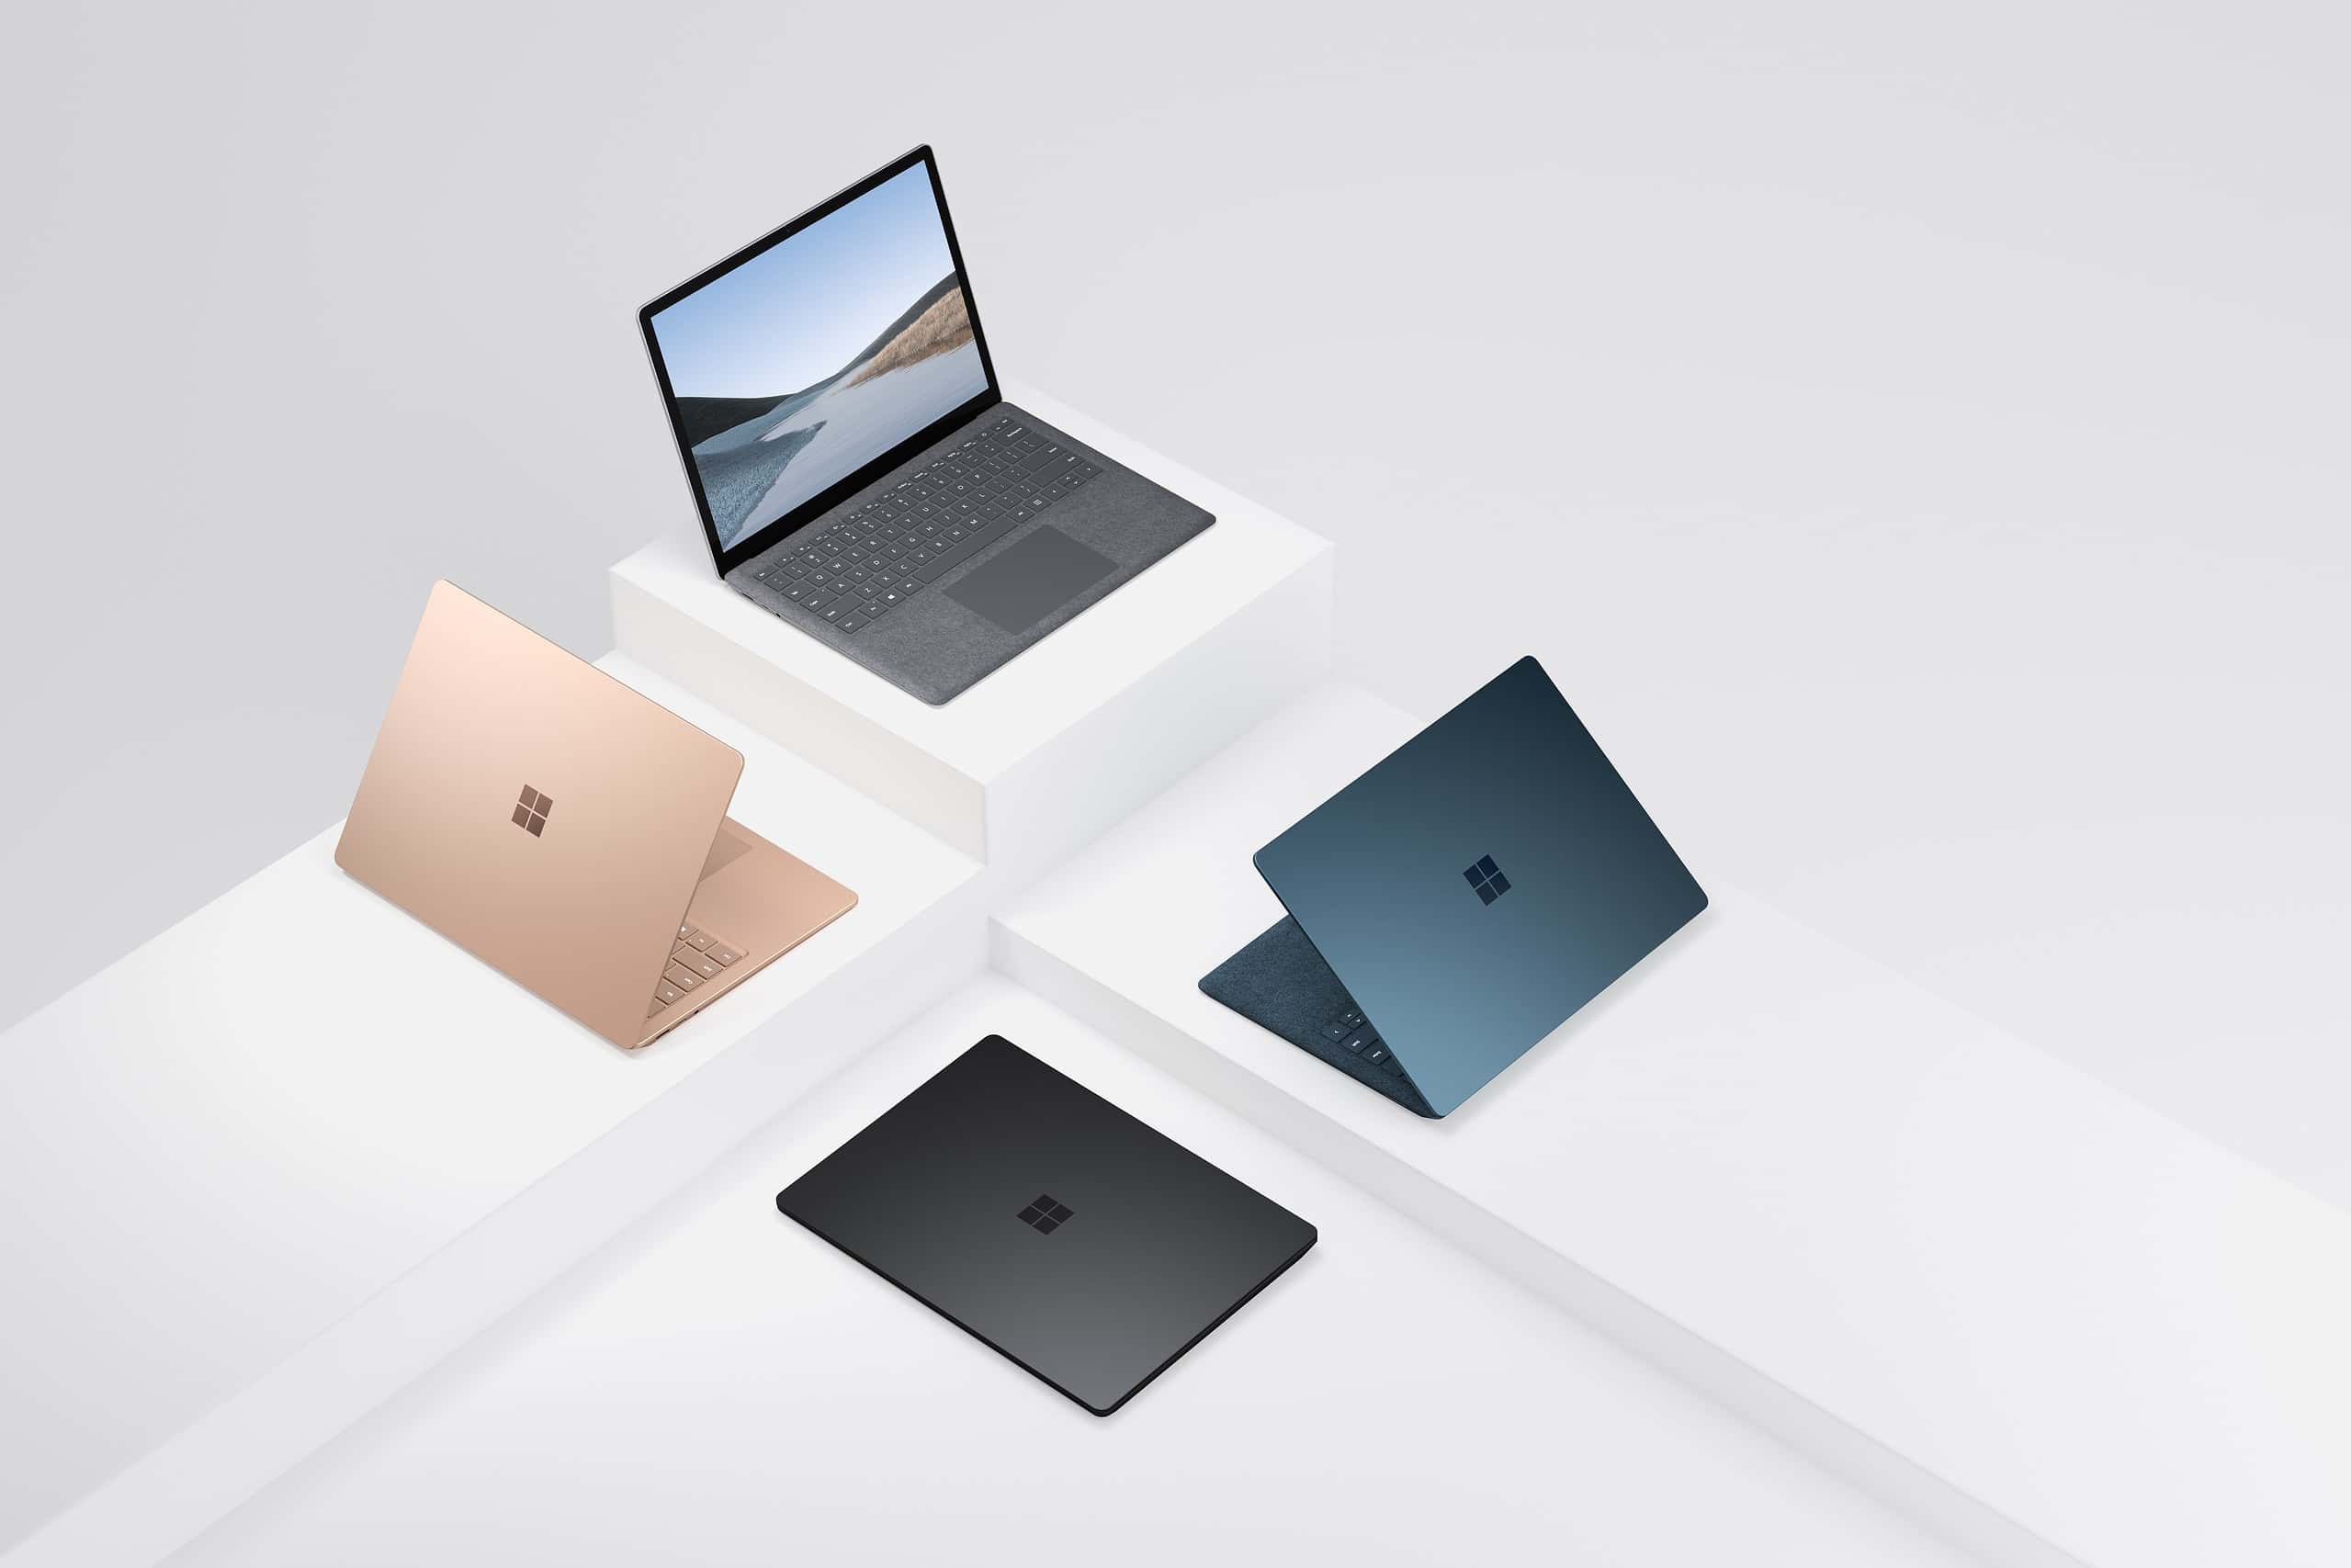 Microsoft updates Surface Laptop 3 with March 2023 firmware version